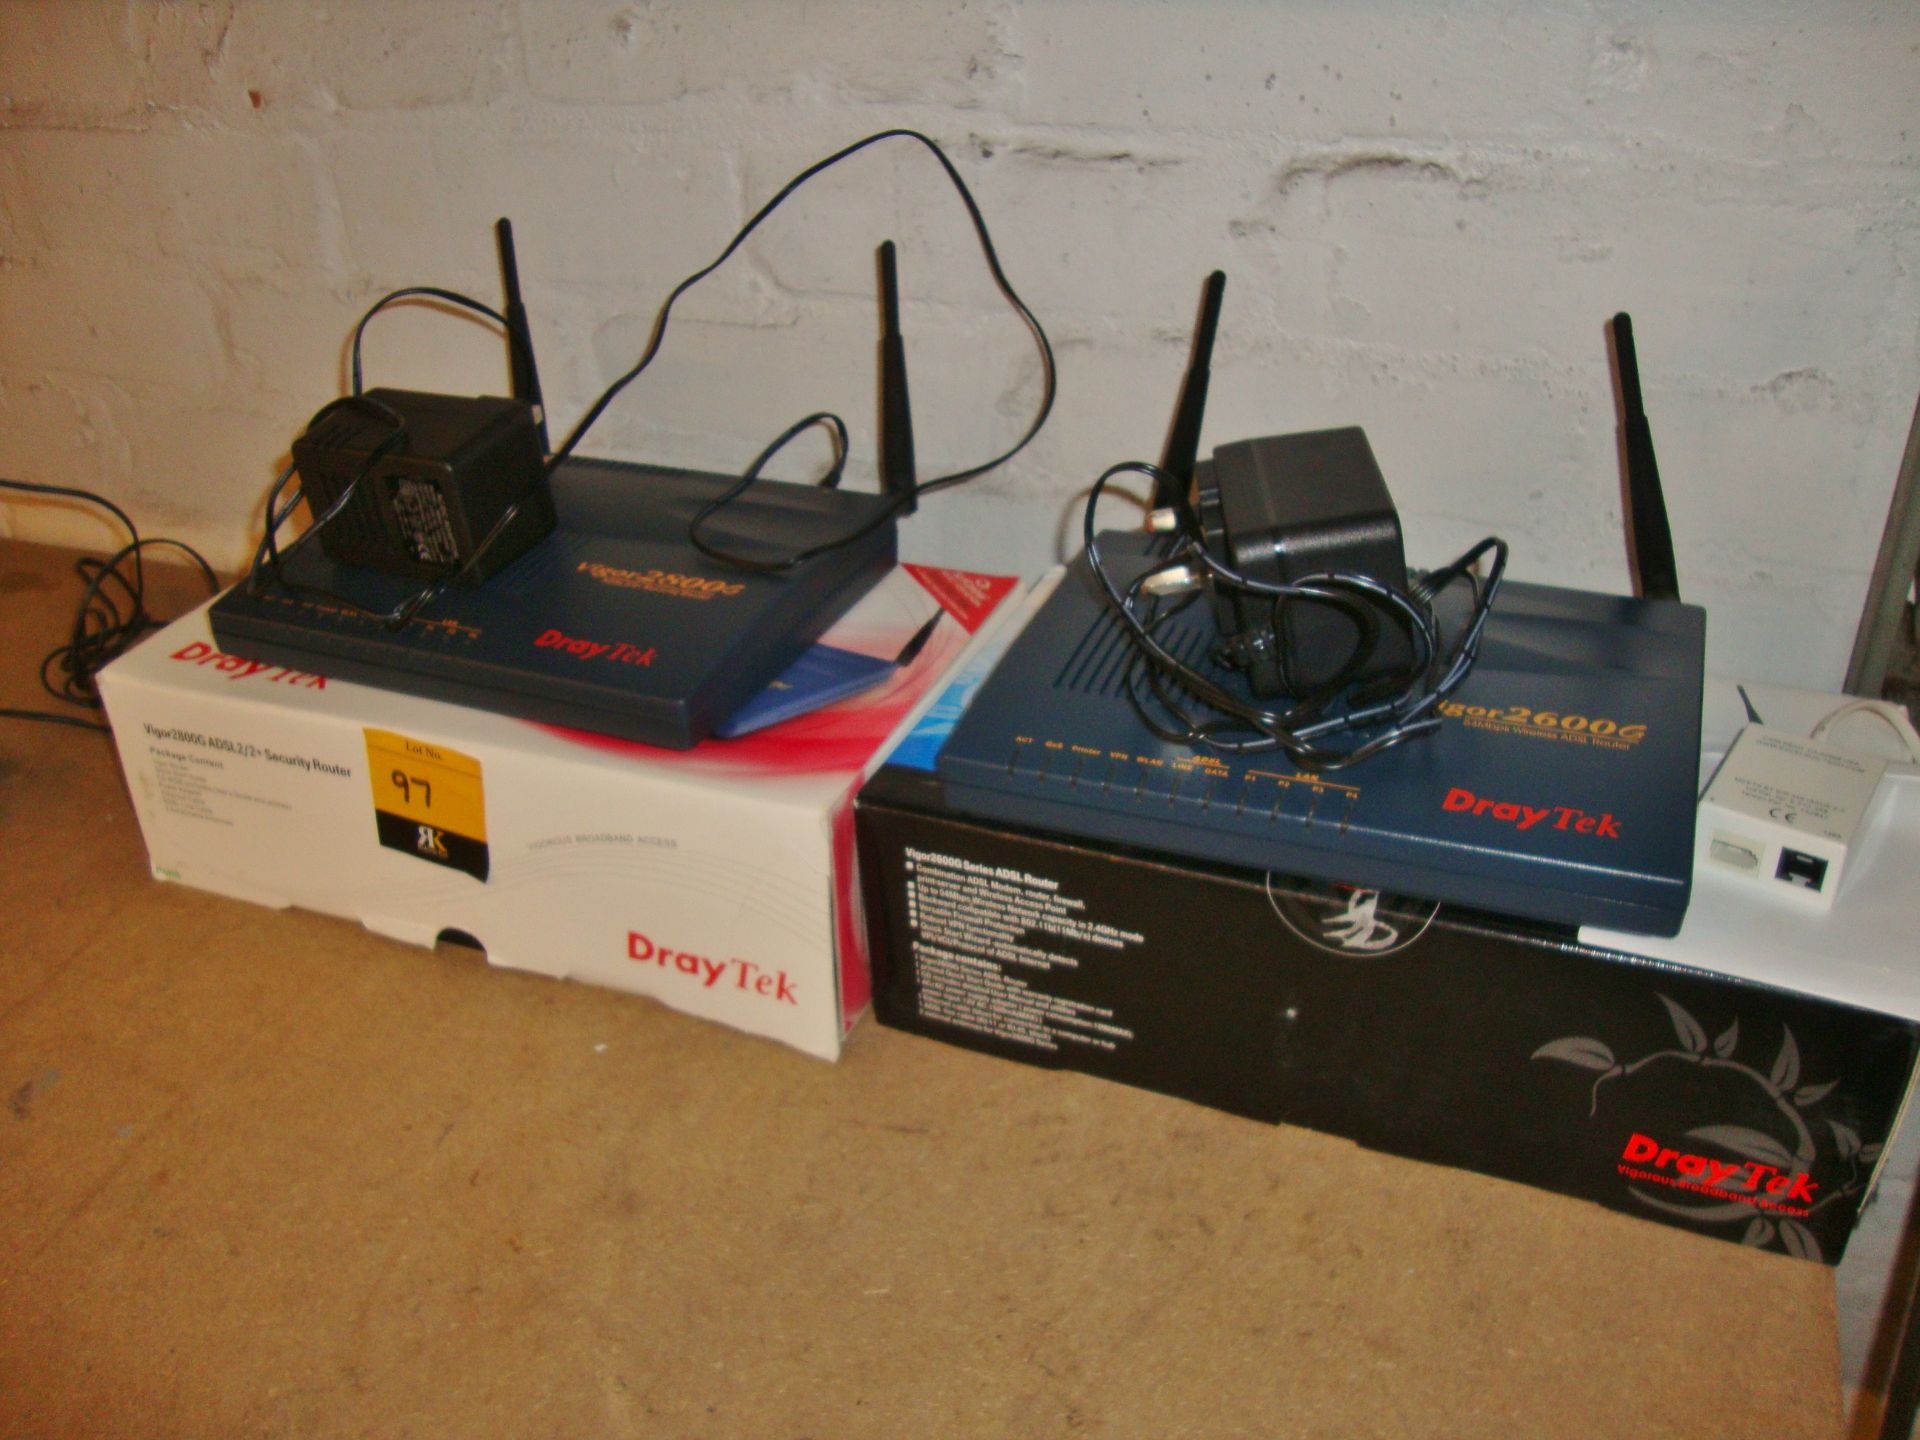 2 off assorted DrayTek routers